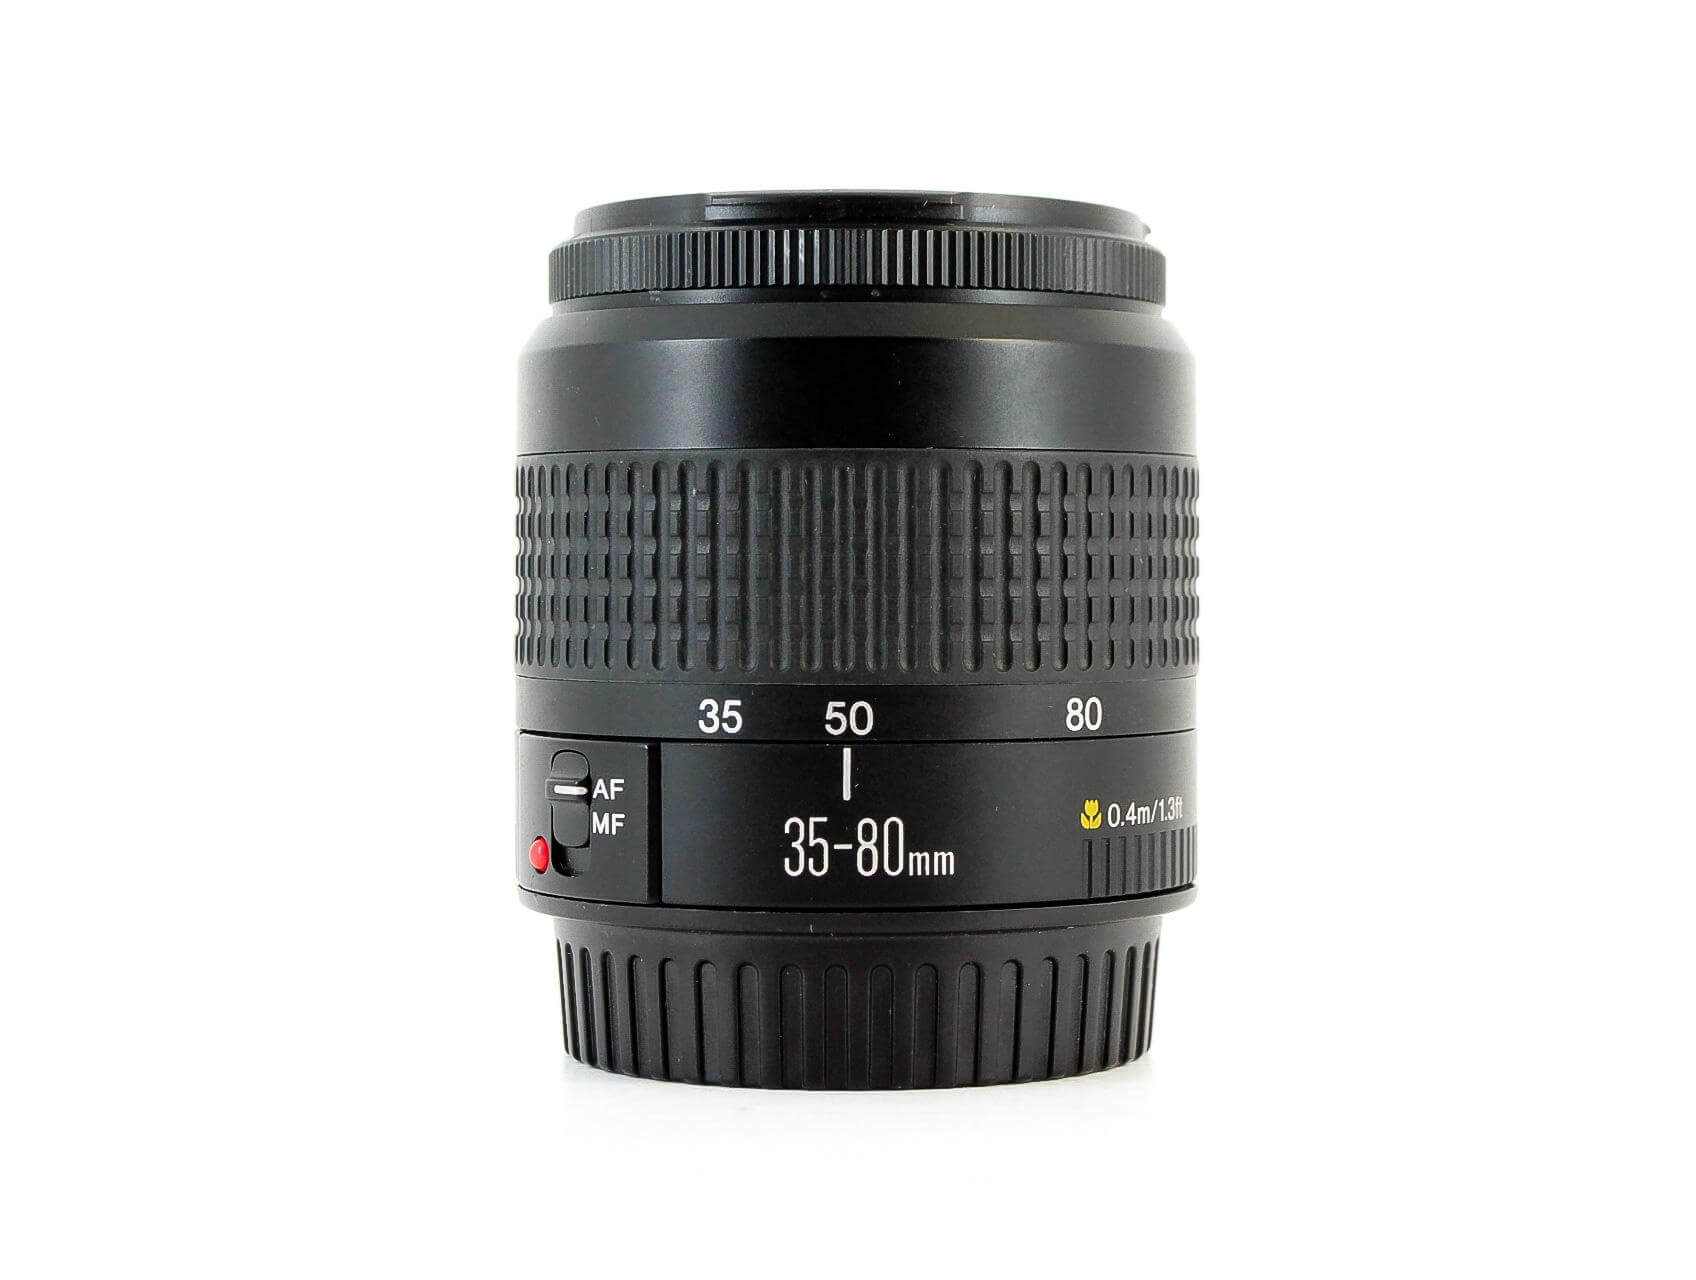 Canon EF 35-80mm f4.0-5.6 III MK3 Lens Lenses and Cameras